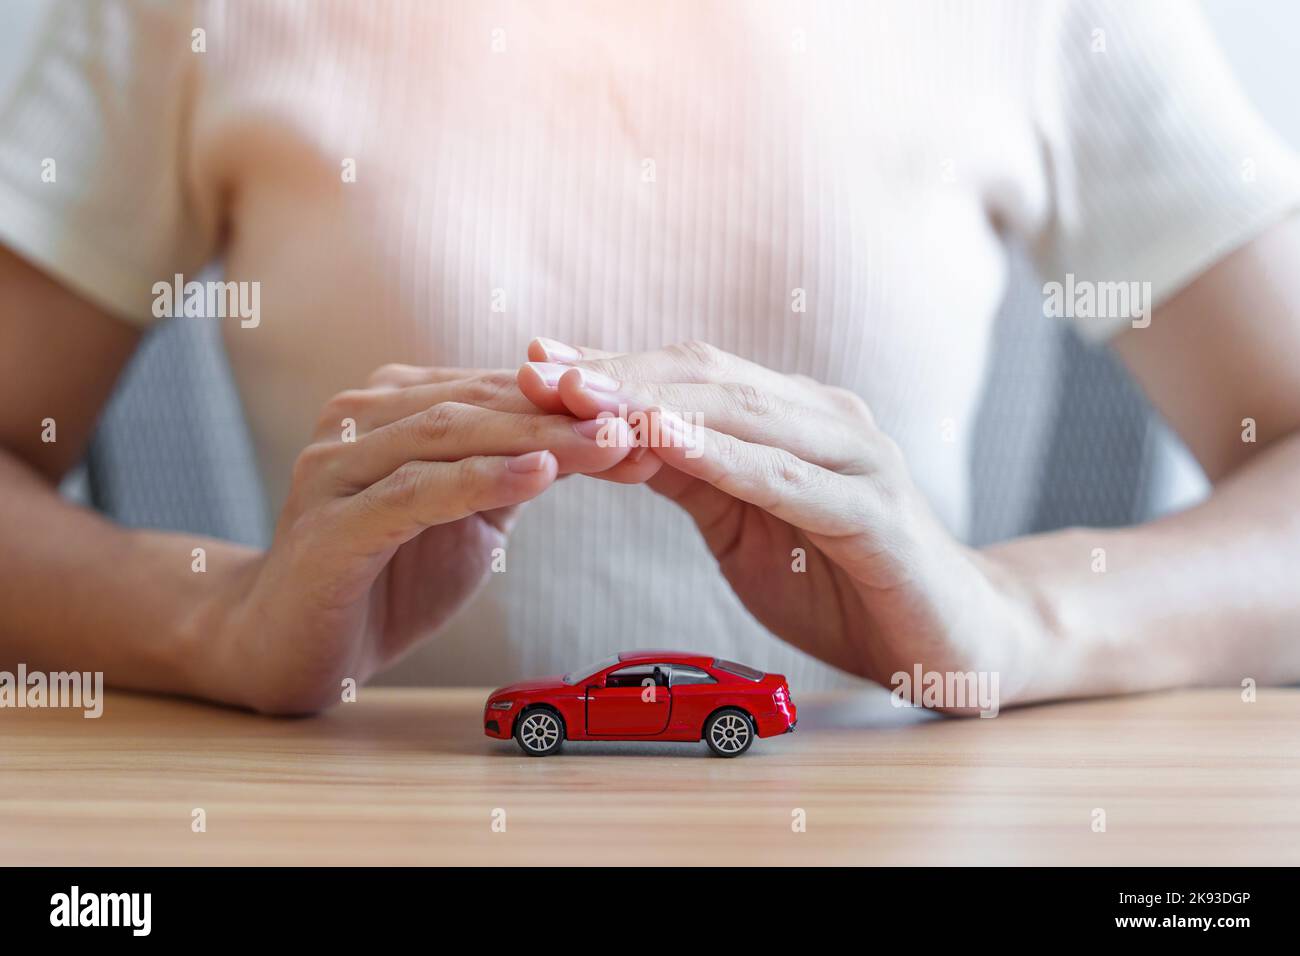 hand cover or protection red car toy on table. Car insurance, warranty, repair, Financial, maintenance  and rental concept Stock Photo